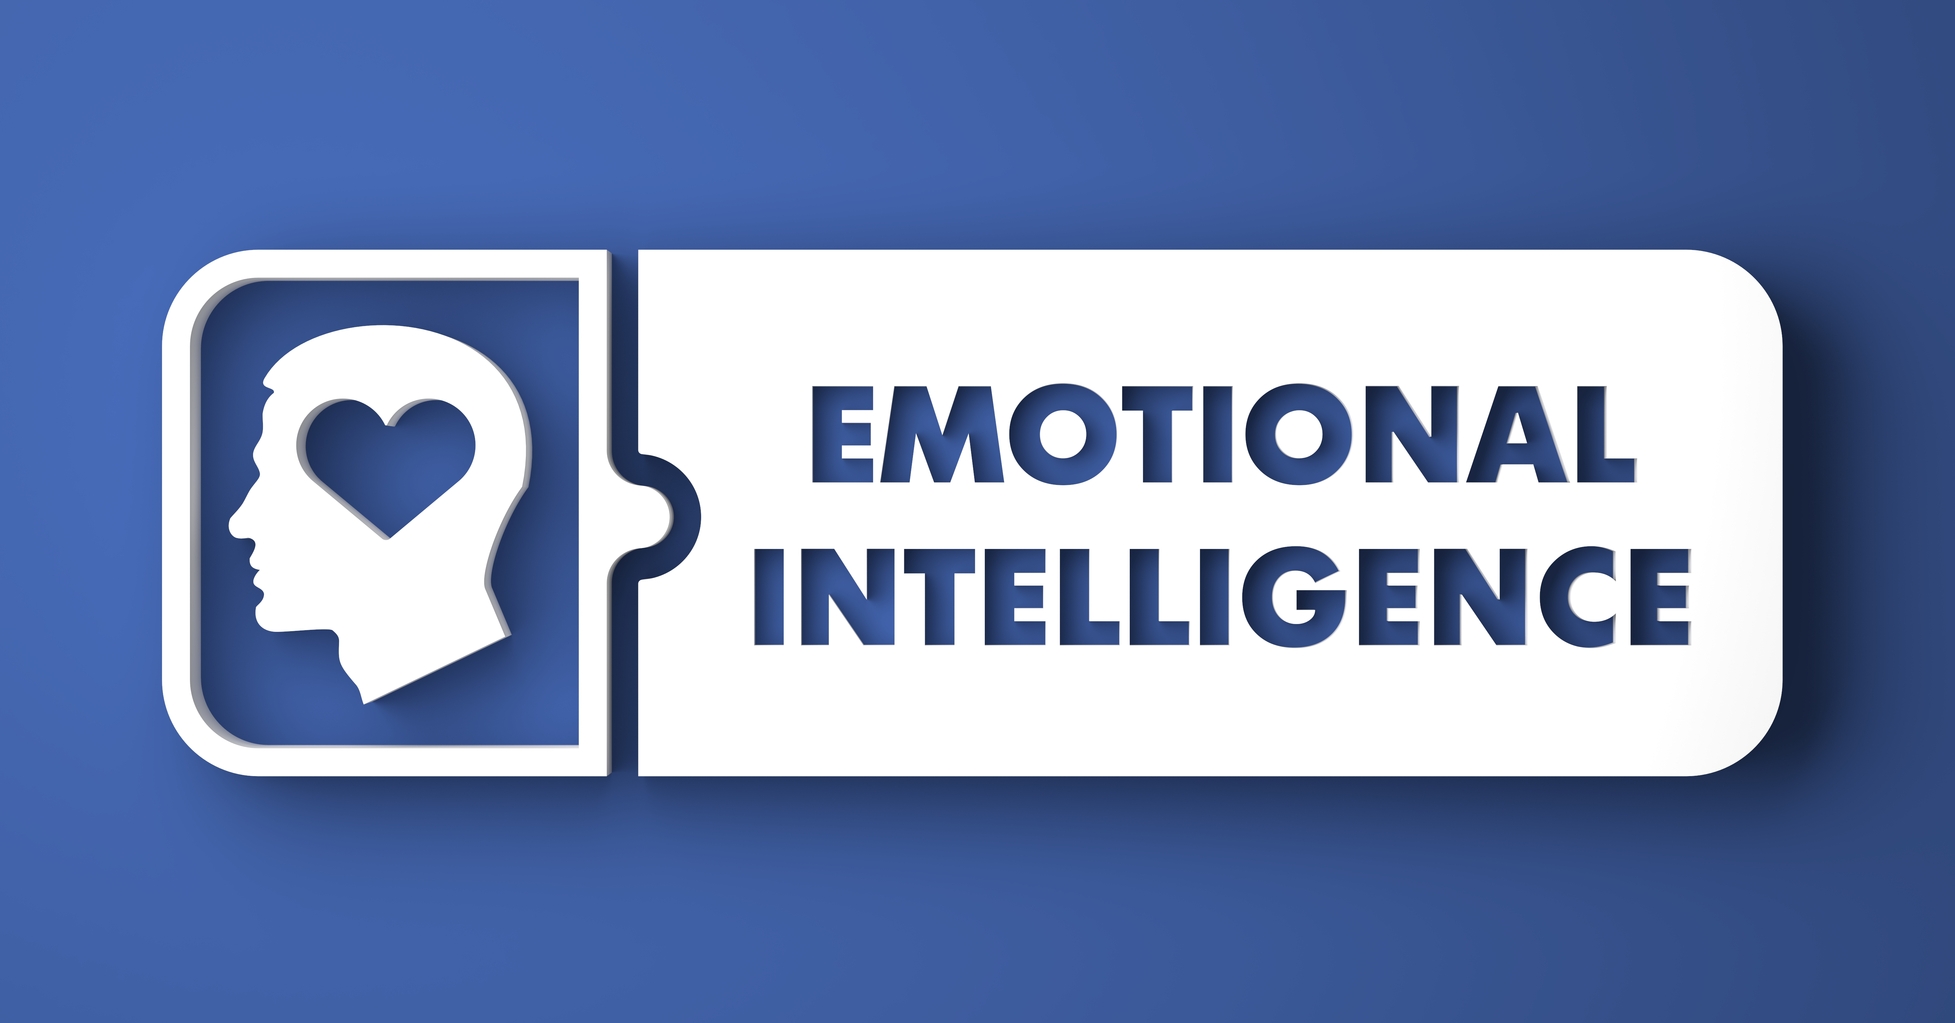 Emotional Intelligence Concept. White Button on Blue Background in Flat Design Style.